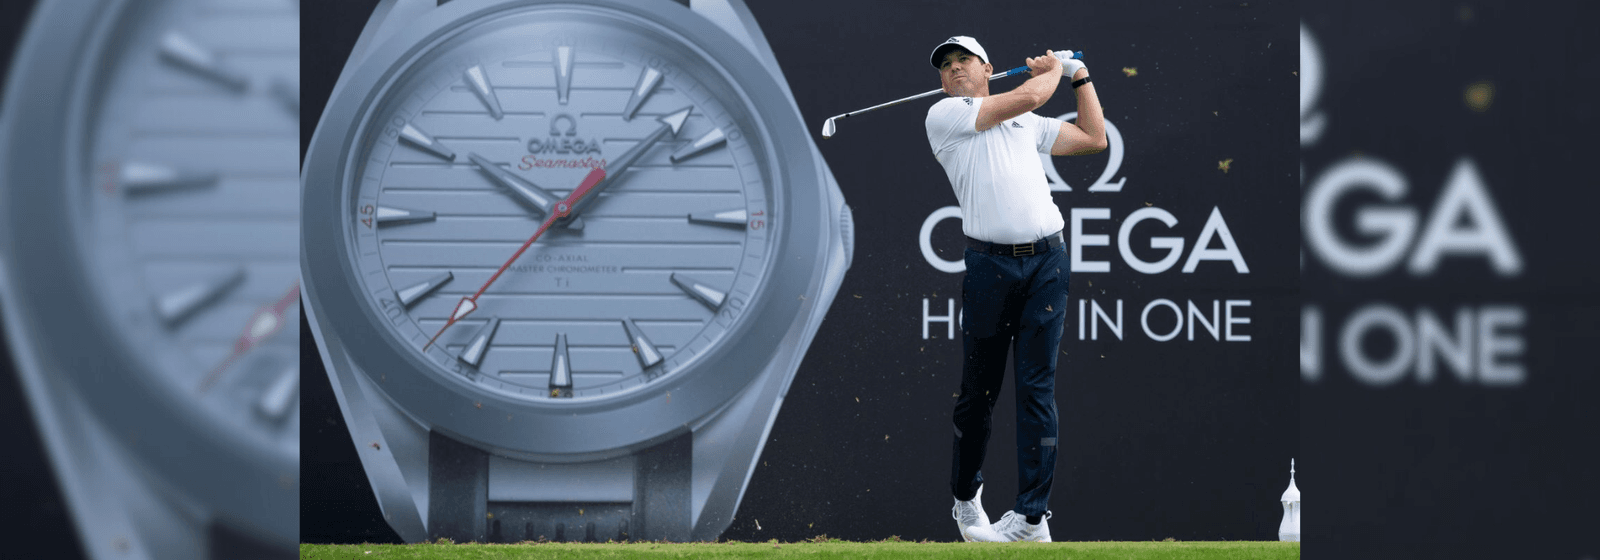 Omega's Prowess On The Fairway: A Look at the Brand's Golfing Legacy